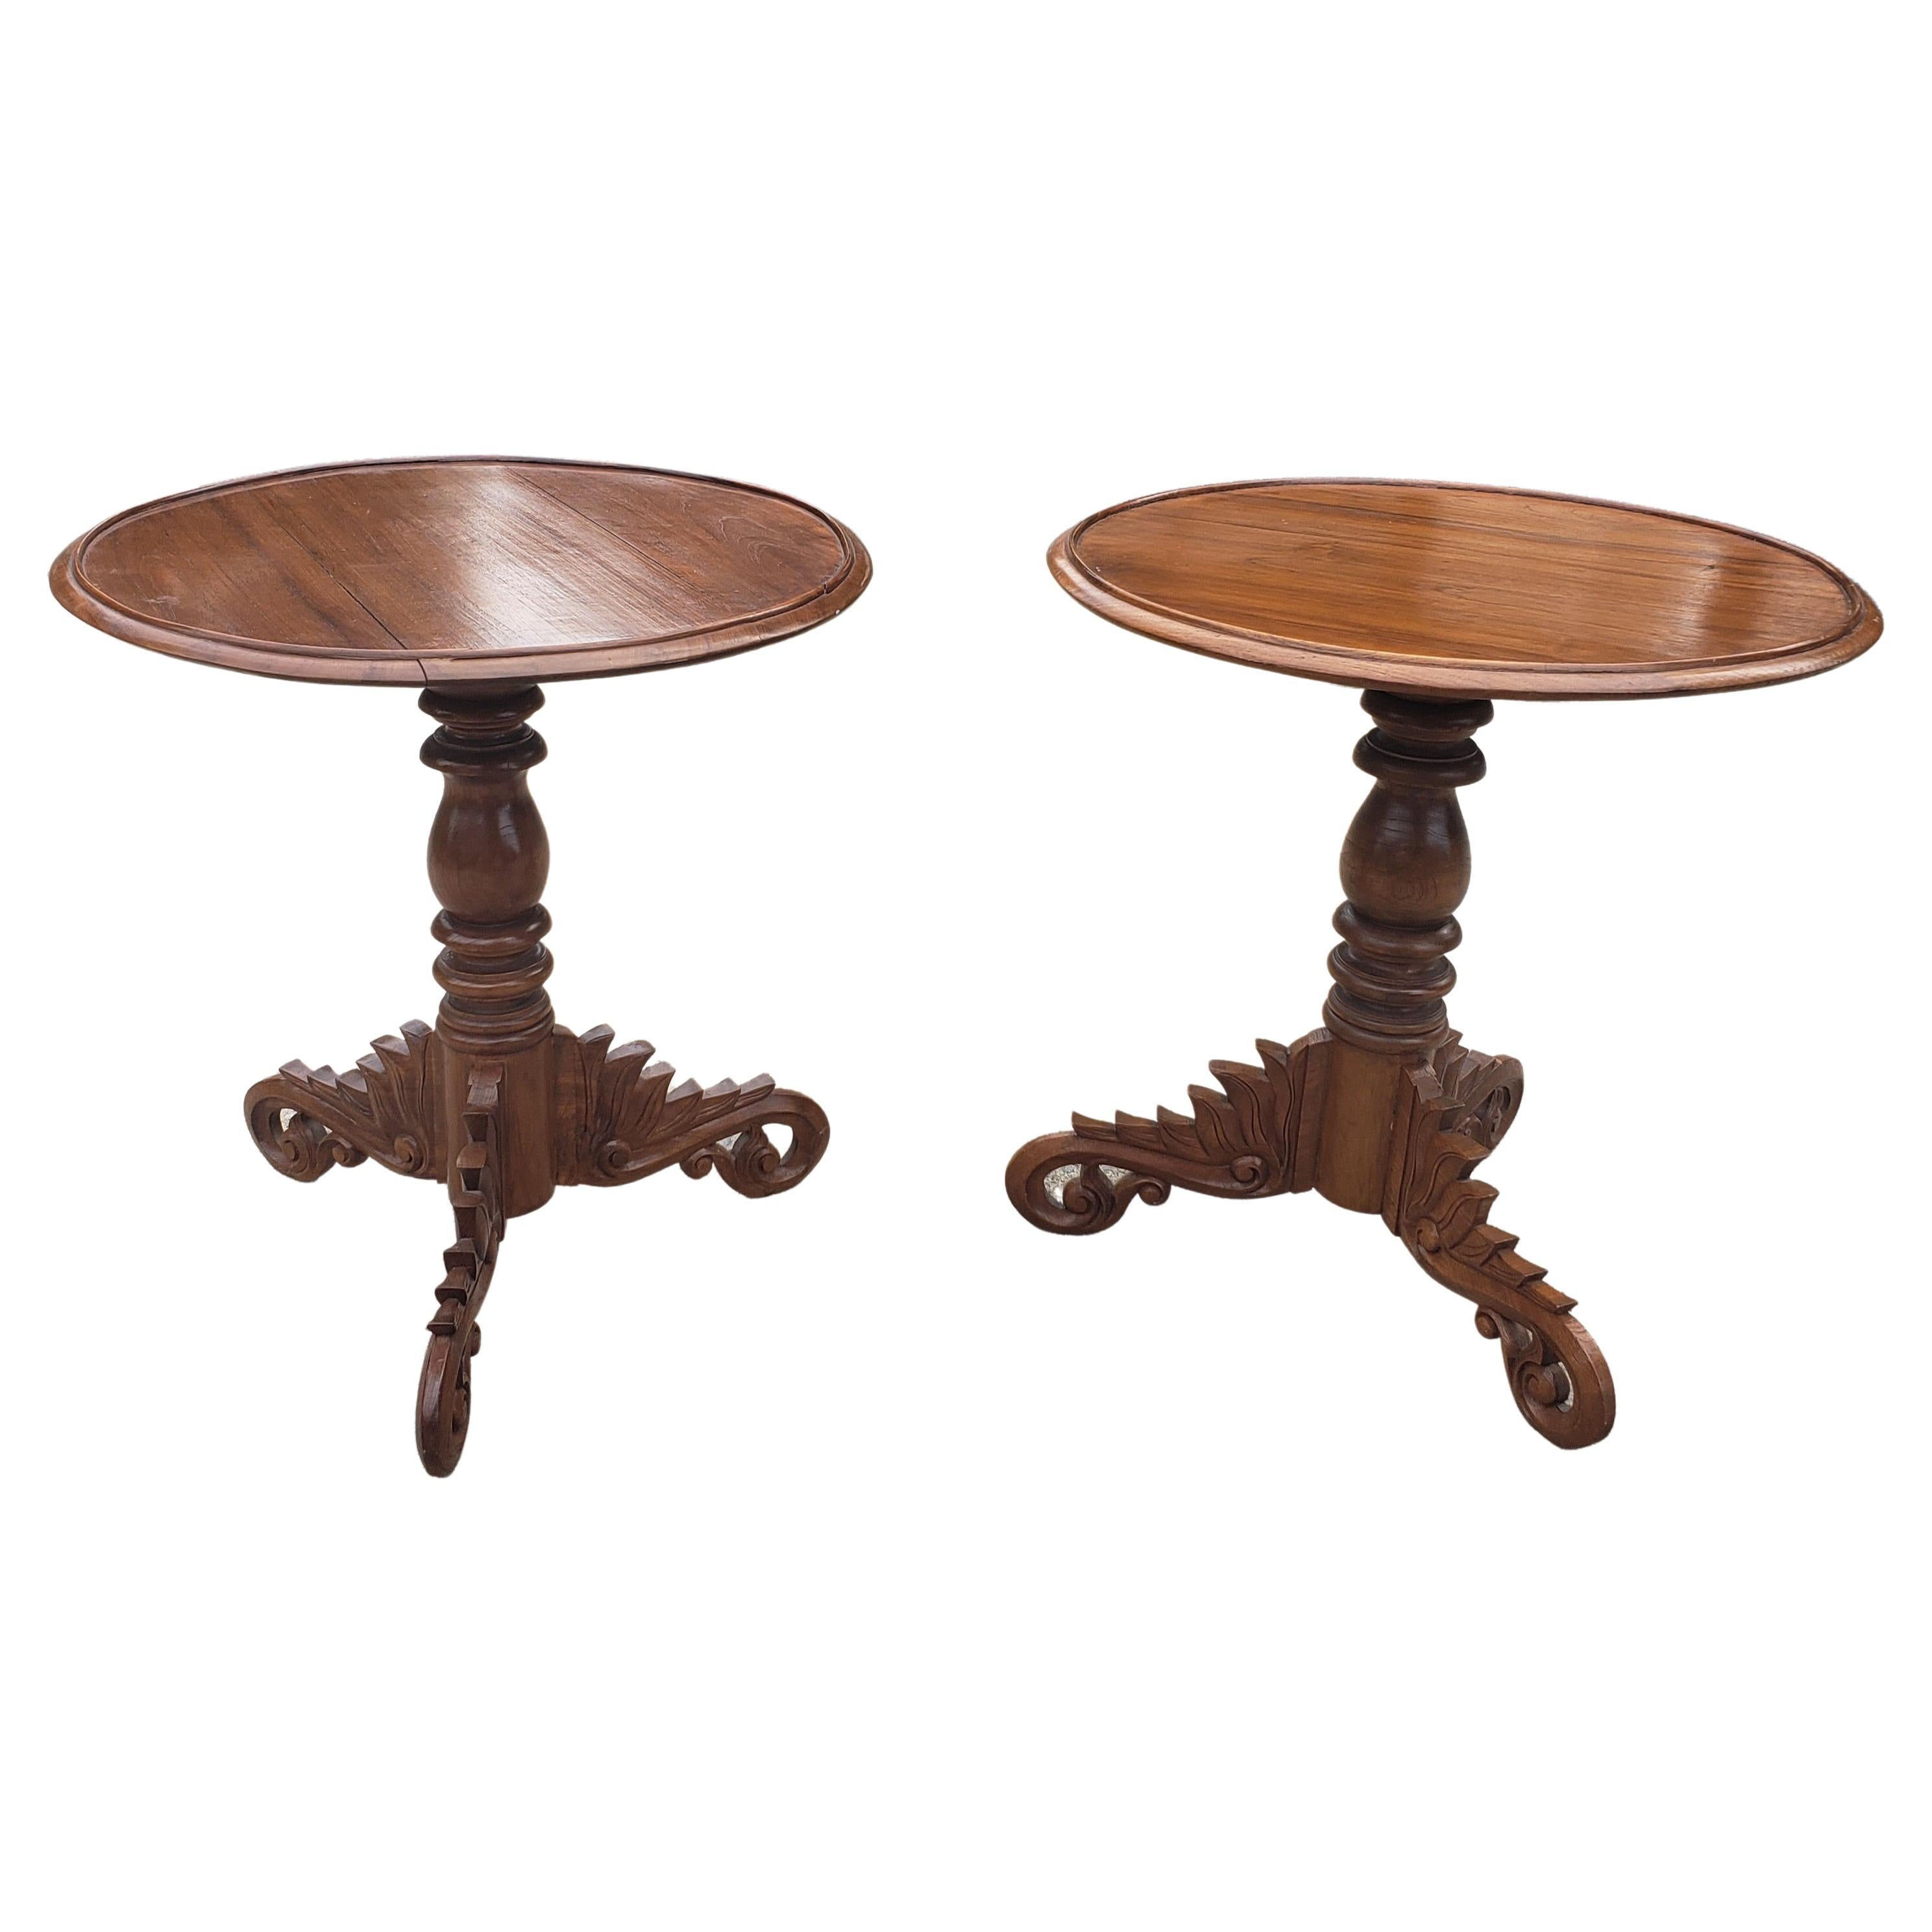 A very unique pair solid pure mahogany side tables / center tables / gueridon tables. Table is supported by a large turned pedestal on tripod alligator like sculpted feet. Tables are very stable with no wiggles at all. Measure 26 inches in diameter